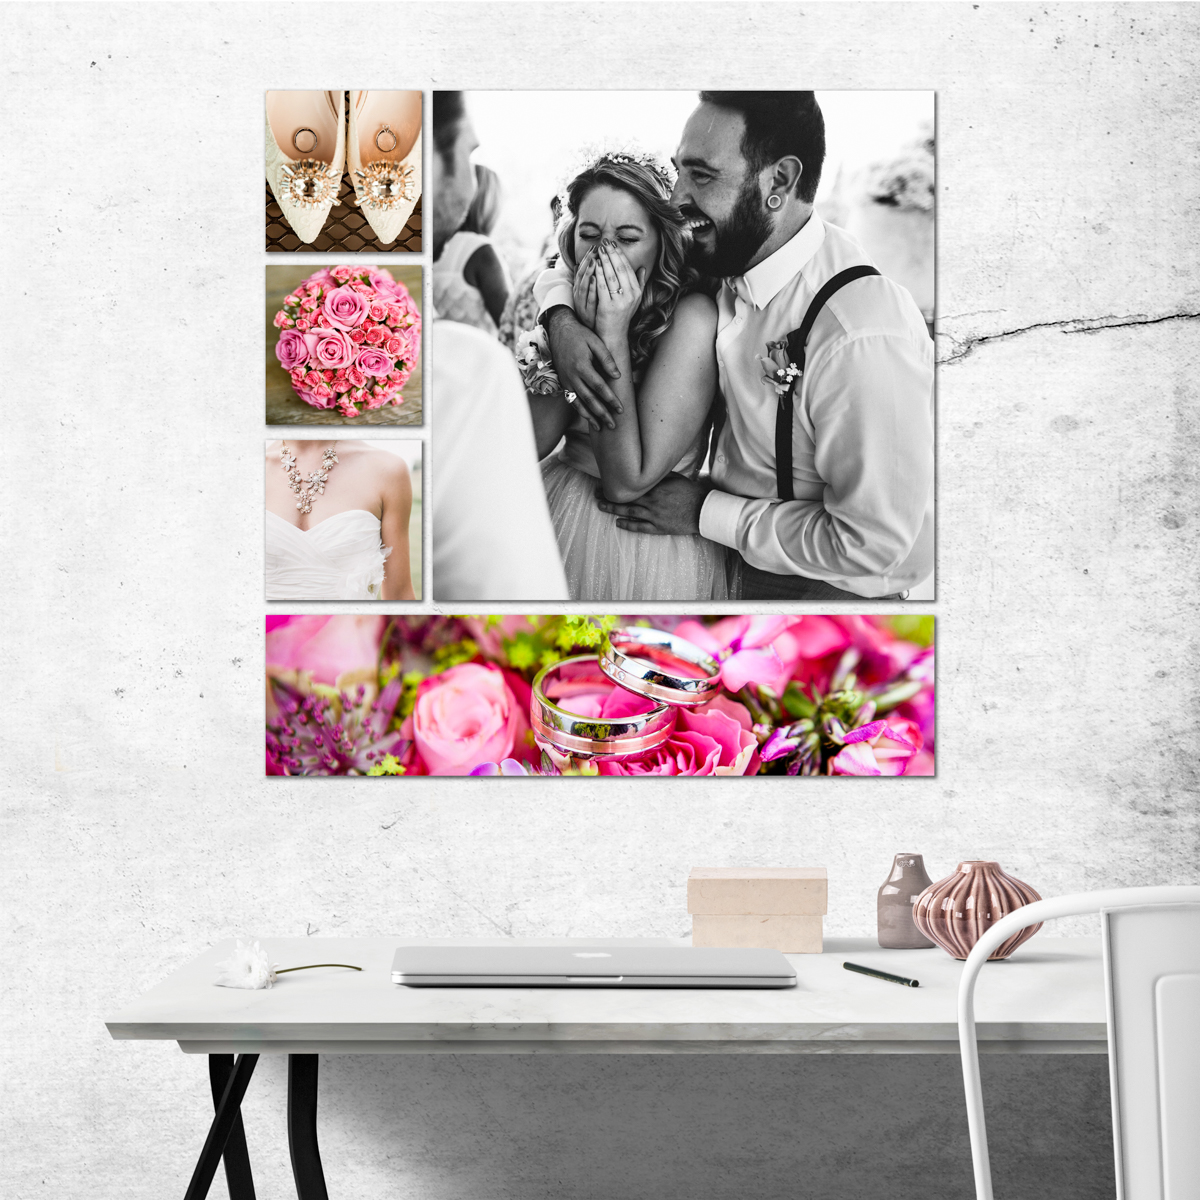 ArtisanHD Wall Art Gallery Clusters and Splits Wall Art Collage - great idea for custom photo gifts